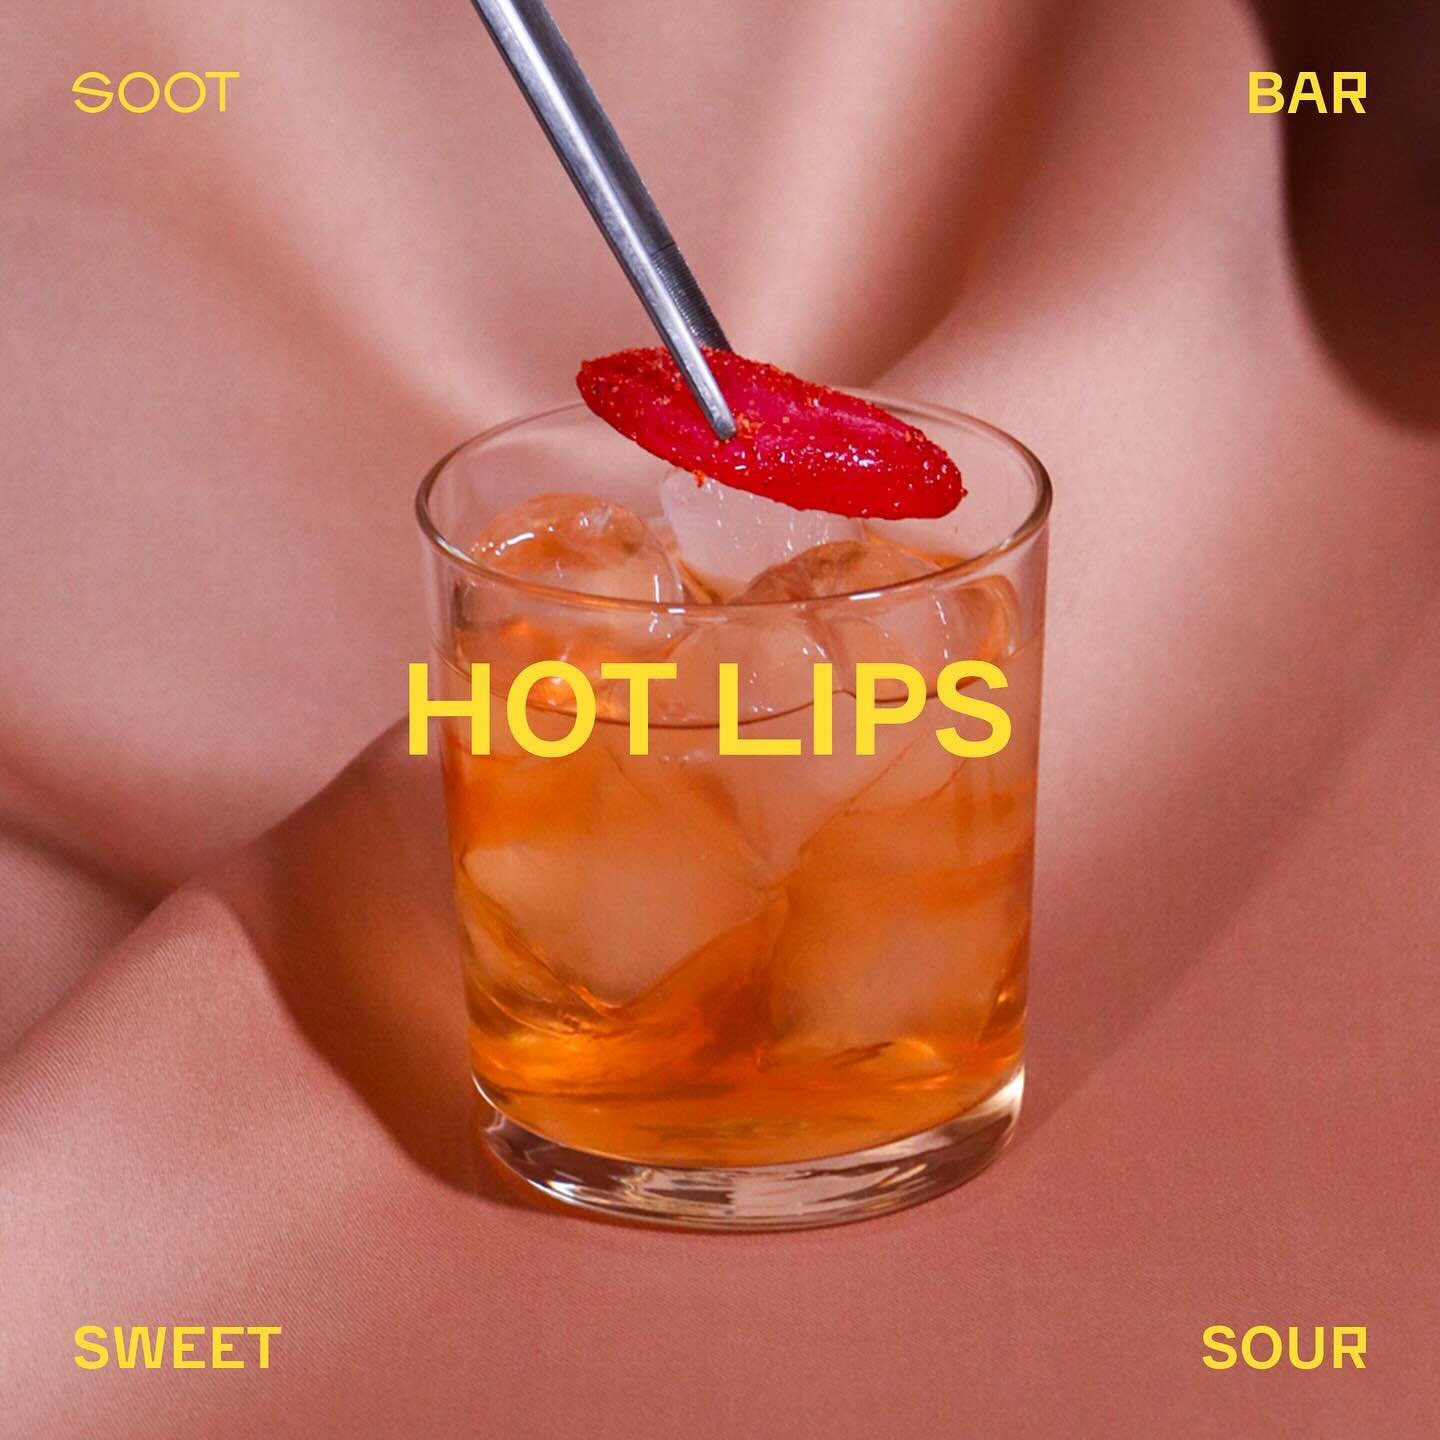 Are you looking for something that will make your lips tingle and your heart race? 🫀

🫦 Then don&rsquo;t miss HOT LIPS, a spicy and refreshing cocktail from SOOT bar. Crafted with gin, blackcurrant, citrus, honey, B&eacute;n&eacute;dictine, arak, a